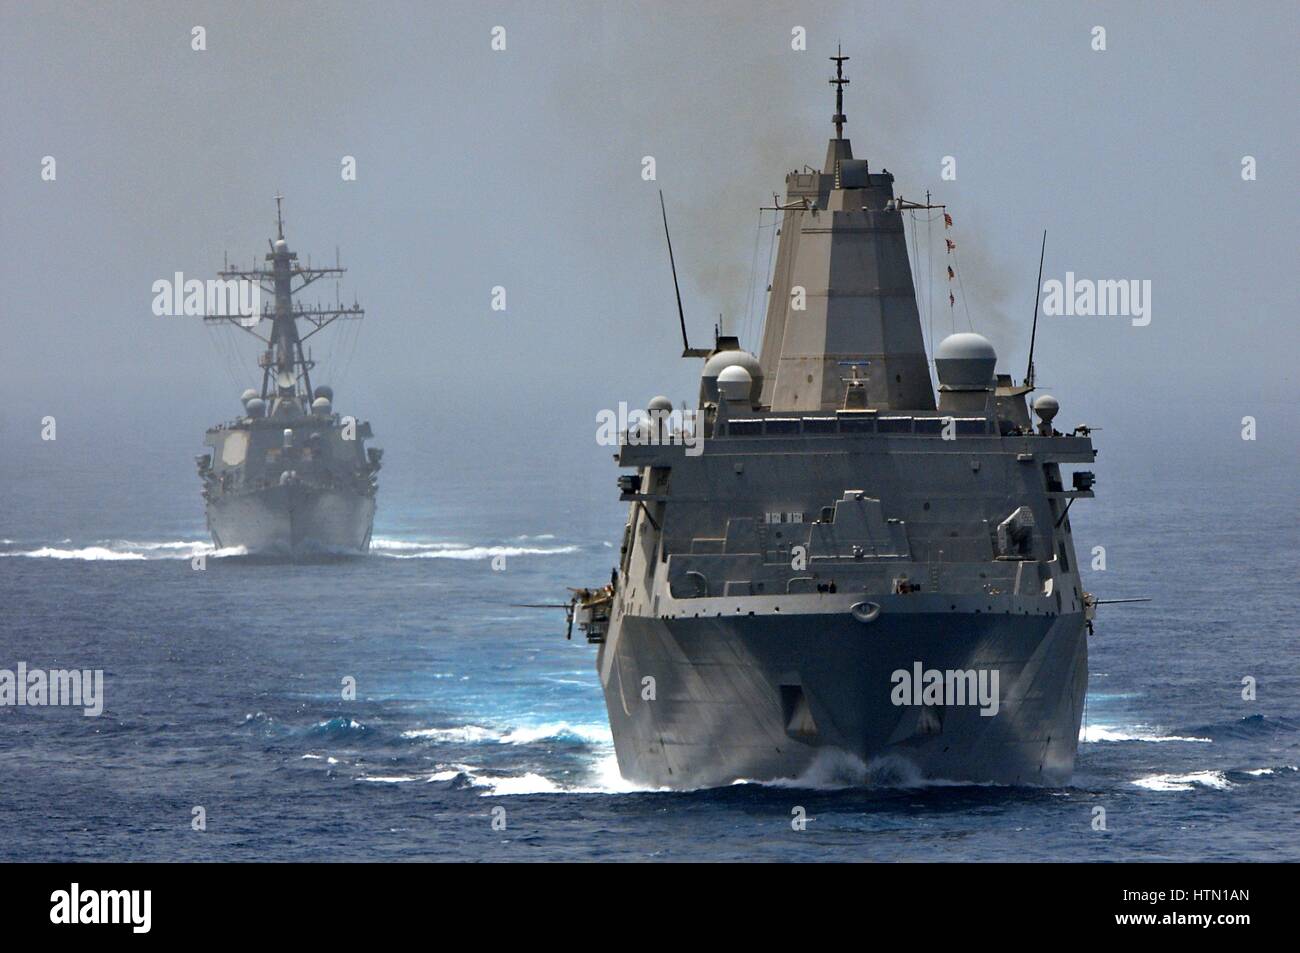 The USN San Antonio-class amphibious transport dock ship USS New York (front) and the USS Arleigh Burke-class guided-missile destroyer USS Porter steam in formation June 10, 2012 in the Strait of Hormuz. Stock Photo